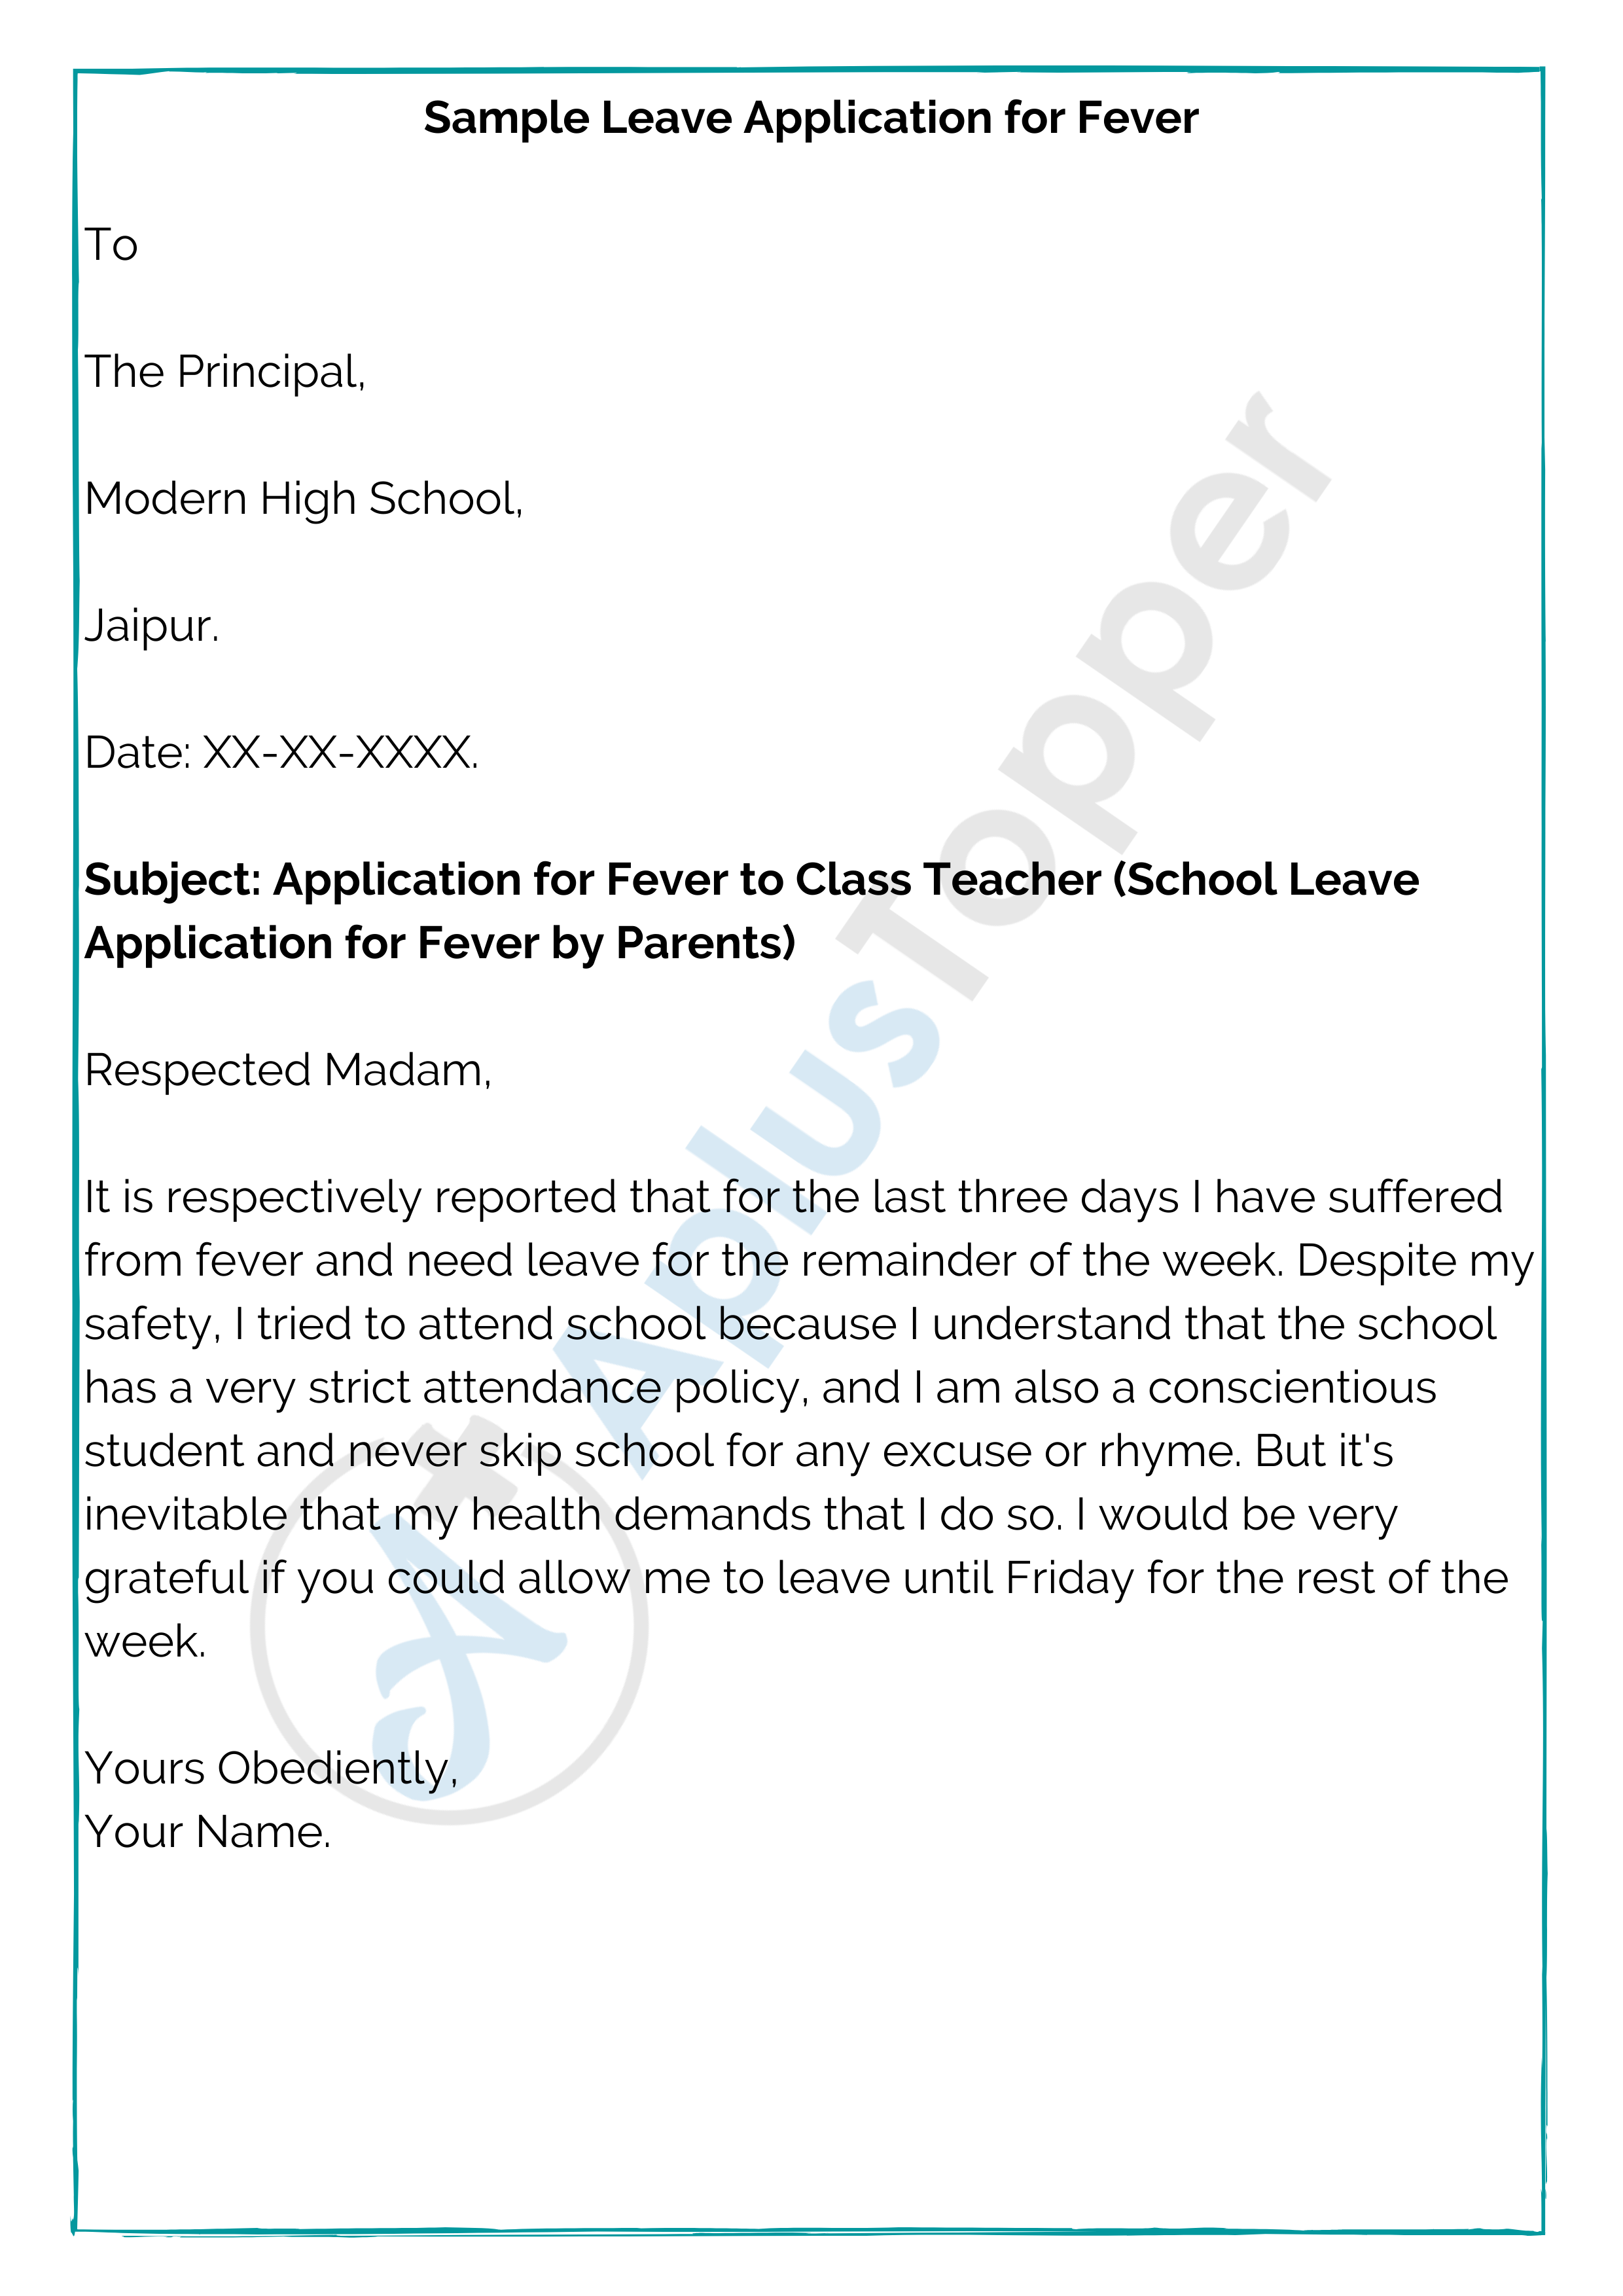 leave application letter for school due to fever by parents